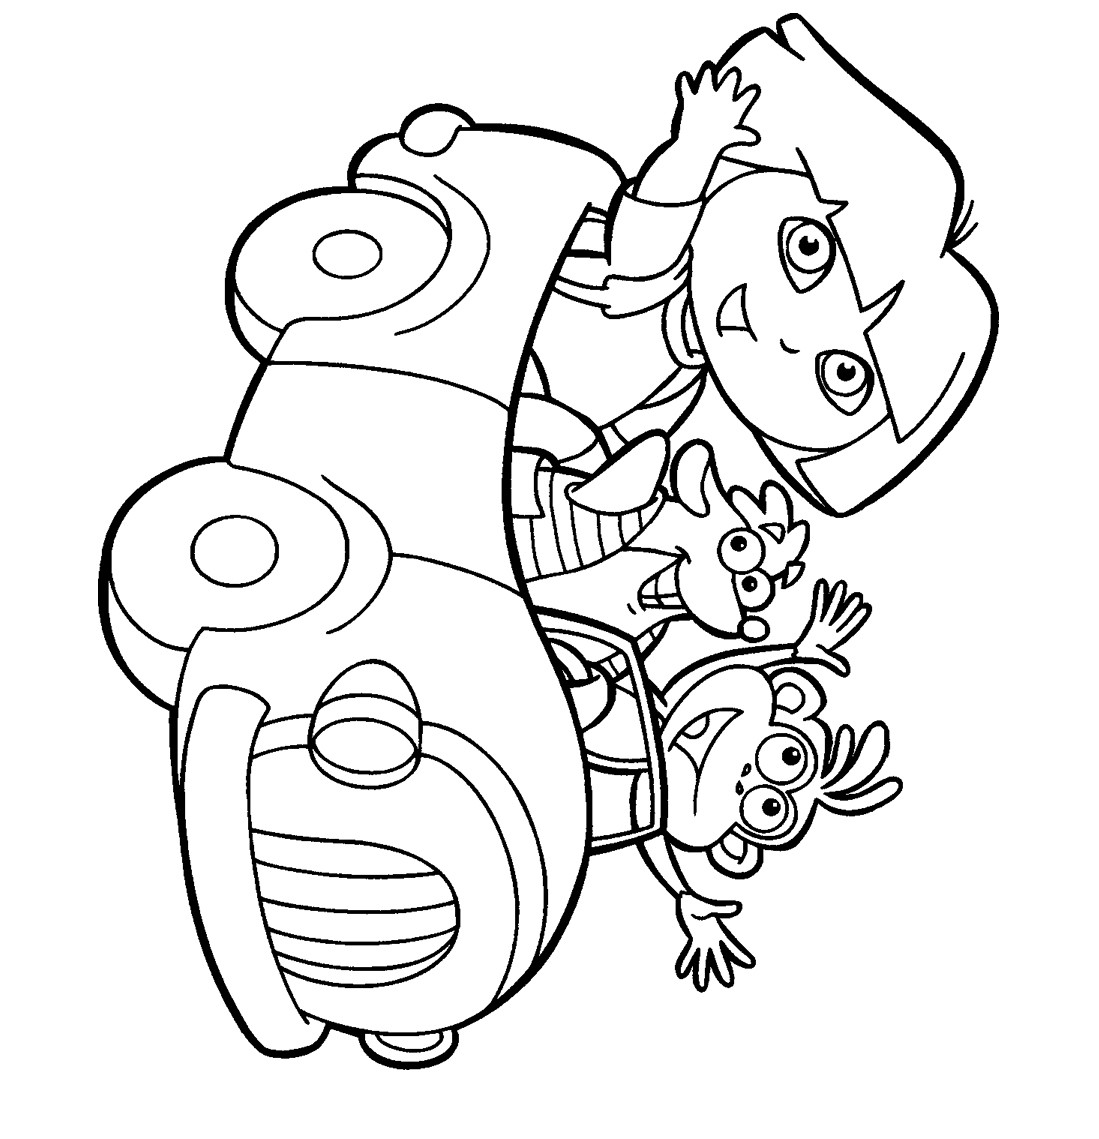 Fun Coloring Pages For Kids
 Printable coloring pages for kids